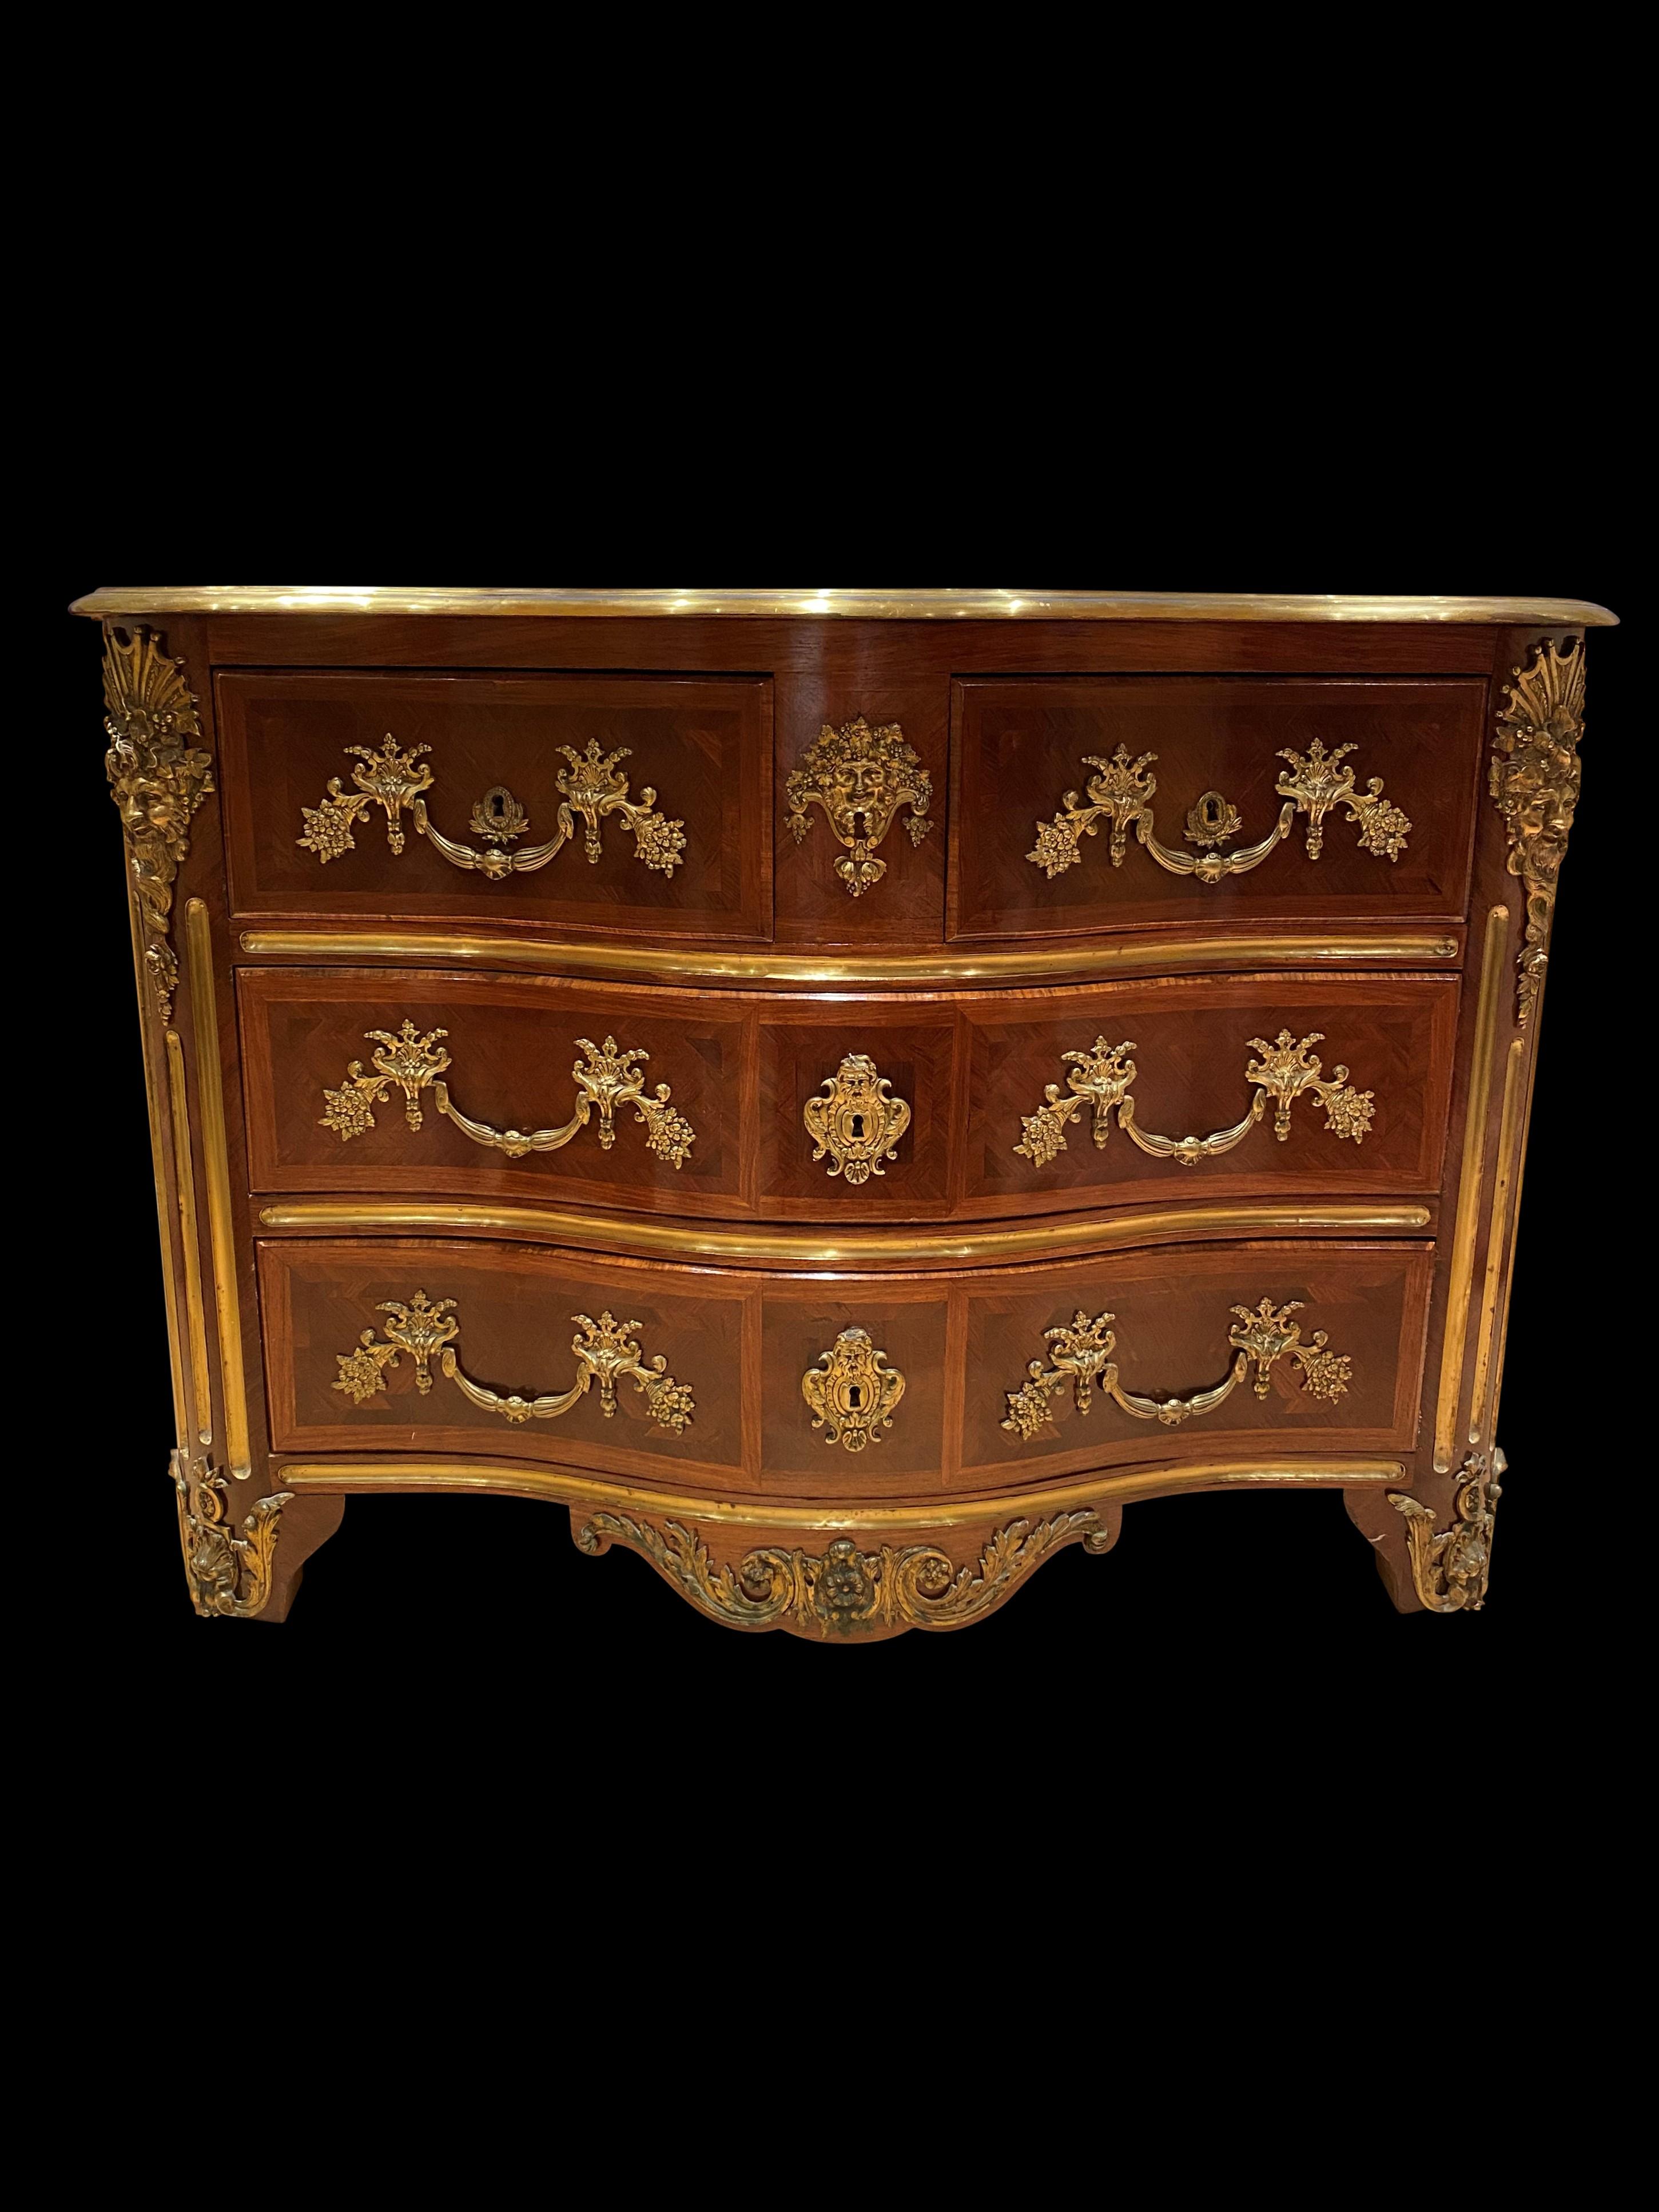 A stunning French 19th century Louis XV St. Four-drawer kingwood, tulipwood and ormolu commode. The bombe shaped commode is raised on short cabriole legs decorated by ormolu masculine masks above scrolled mounts. The scrolled shaped frieze is